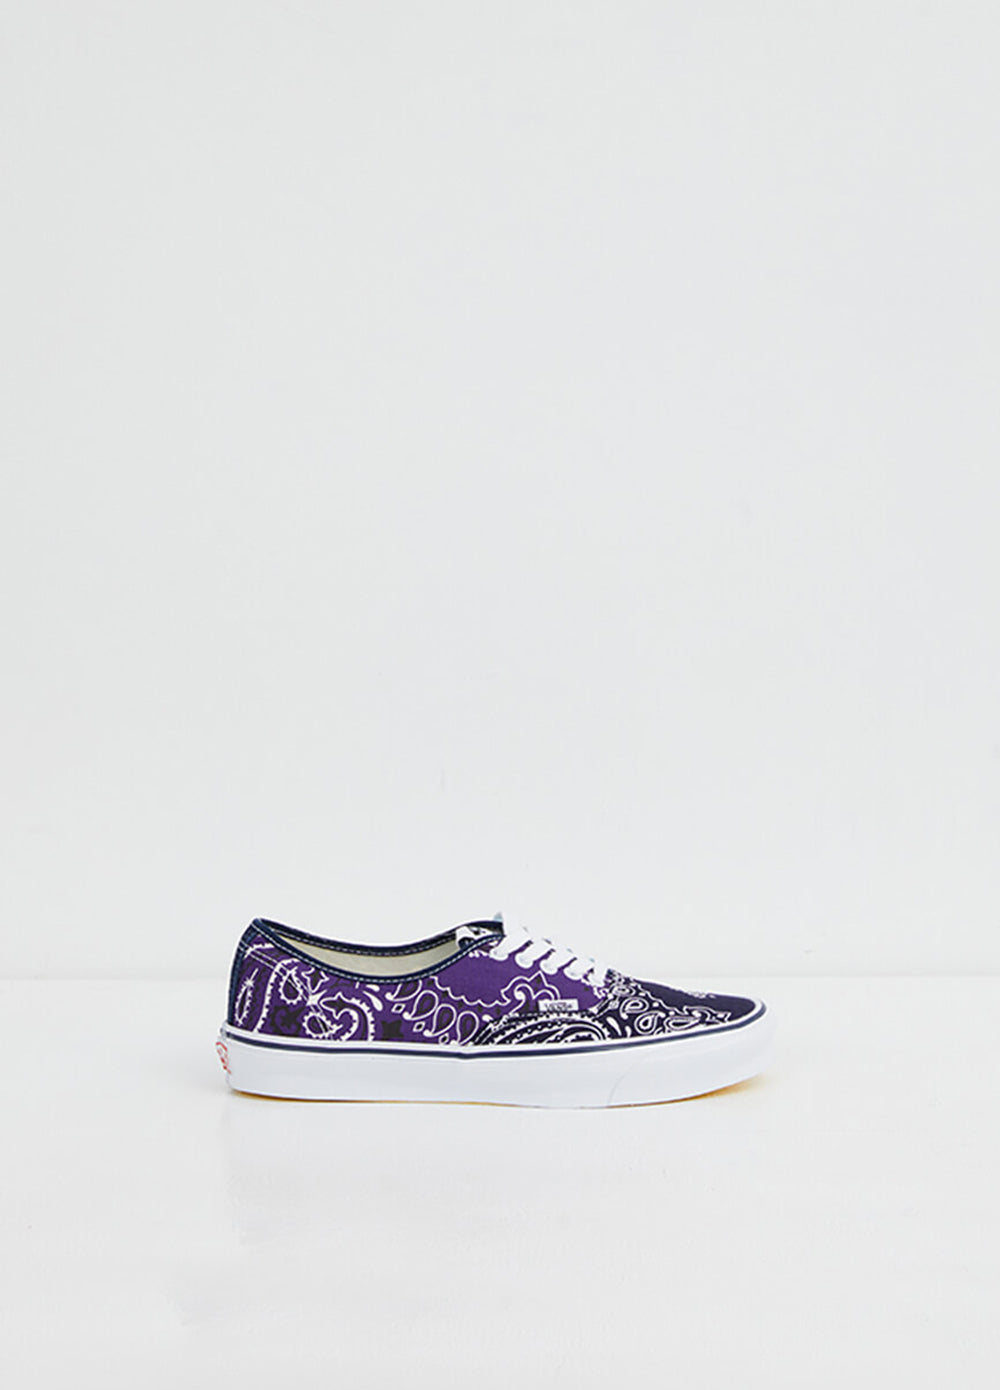 x Bedwin OG Authentic LX Sneakers